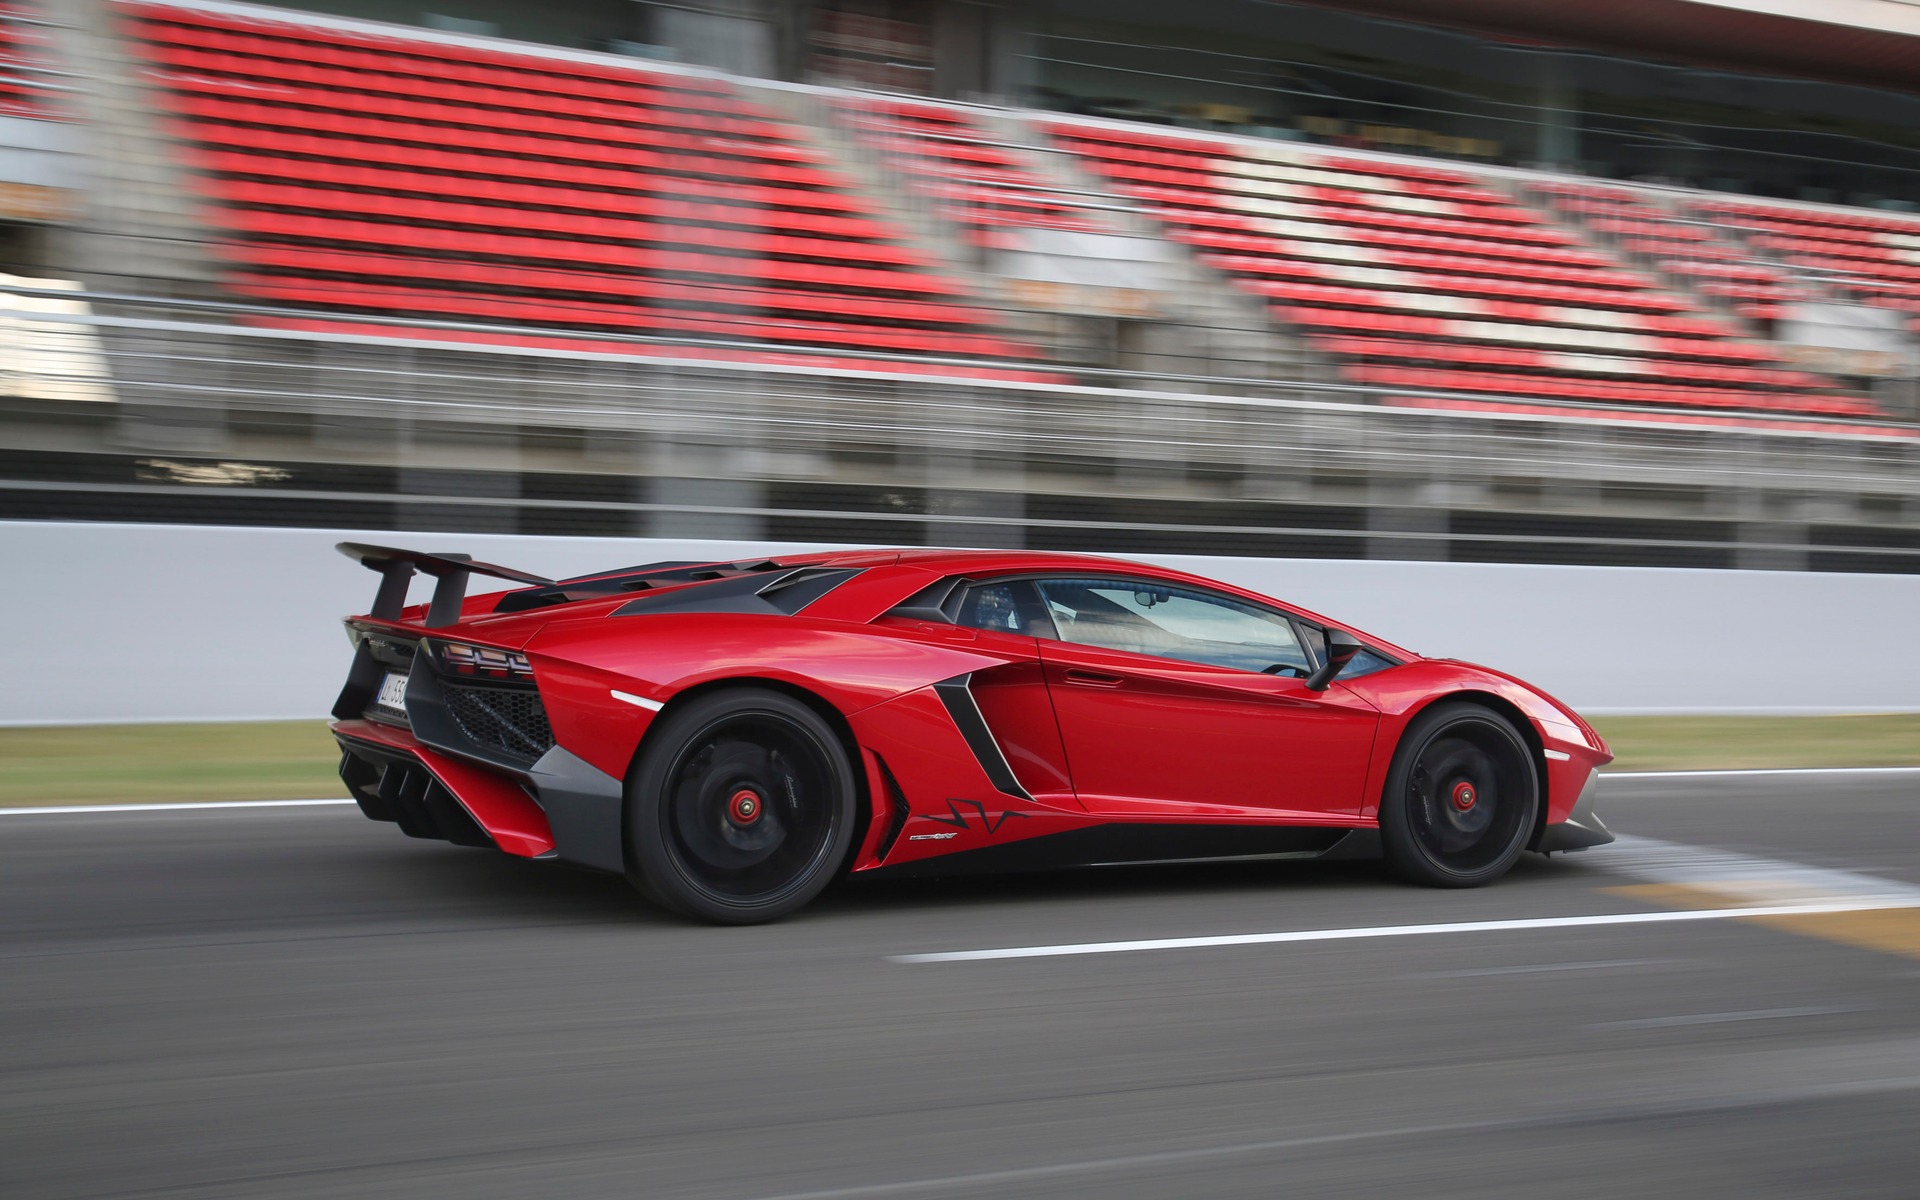 2017 Lamborghini Aventador - News, reviews, picture galleries and videos -  The Car Guide